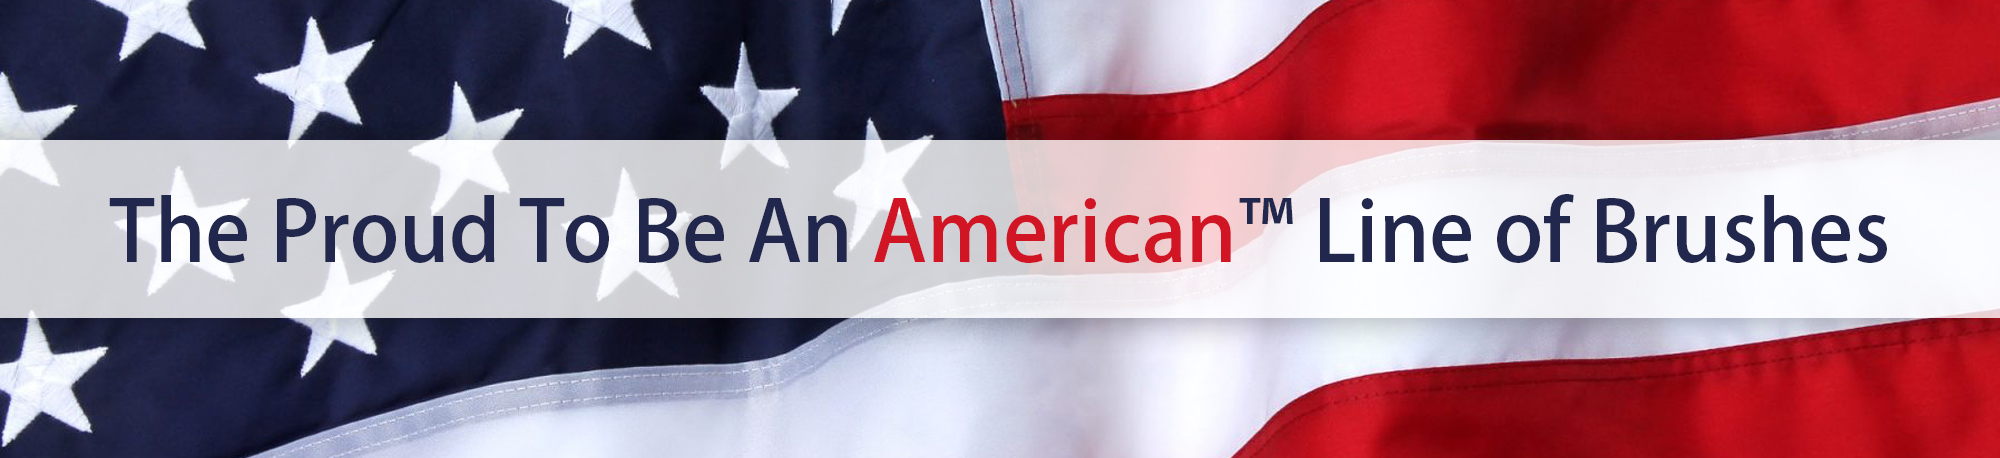 The Proud To Be An American™ line of brushes